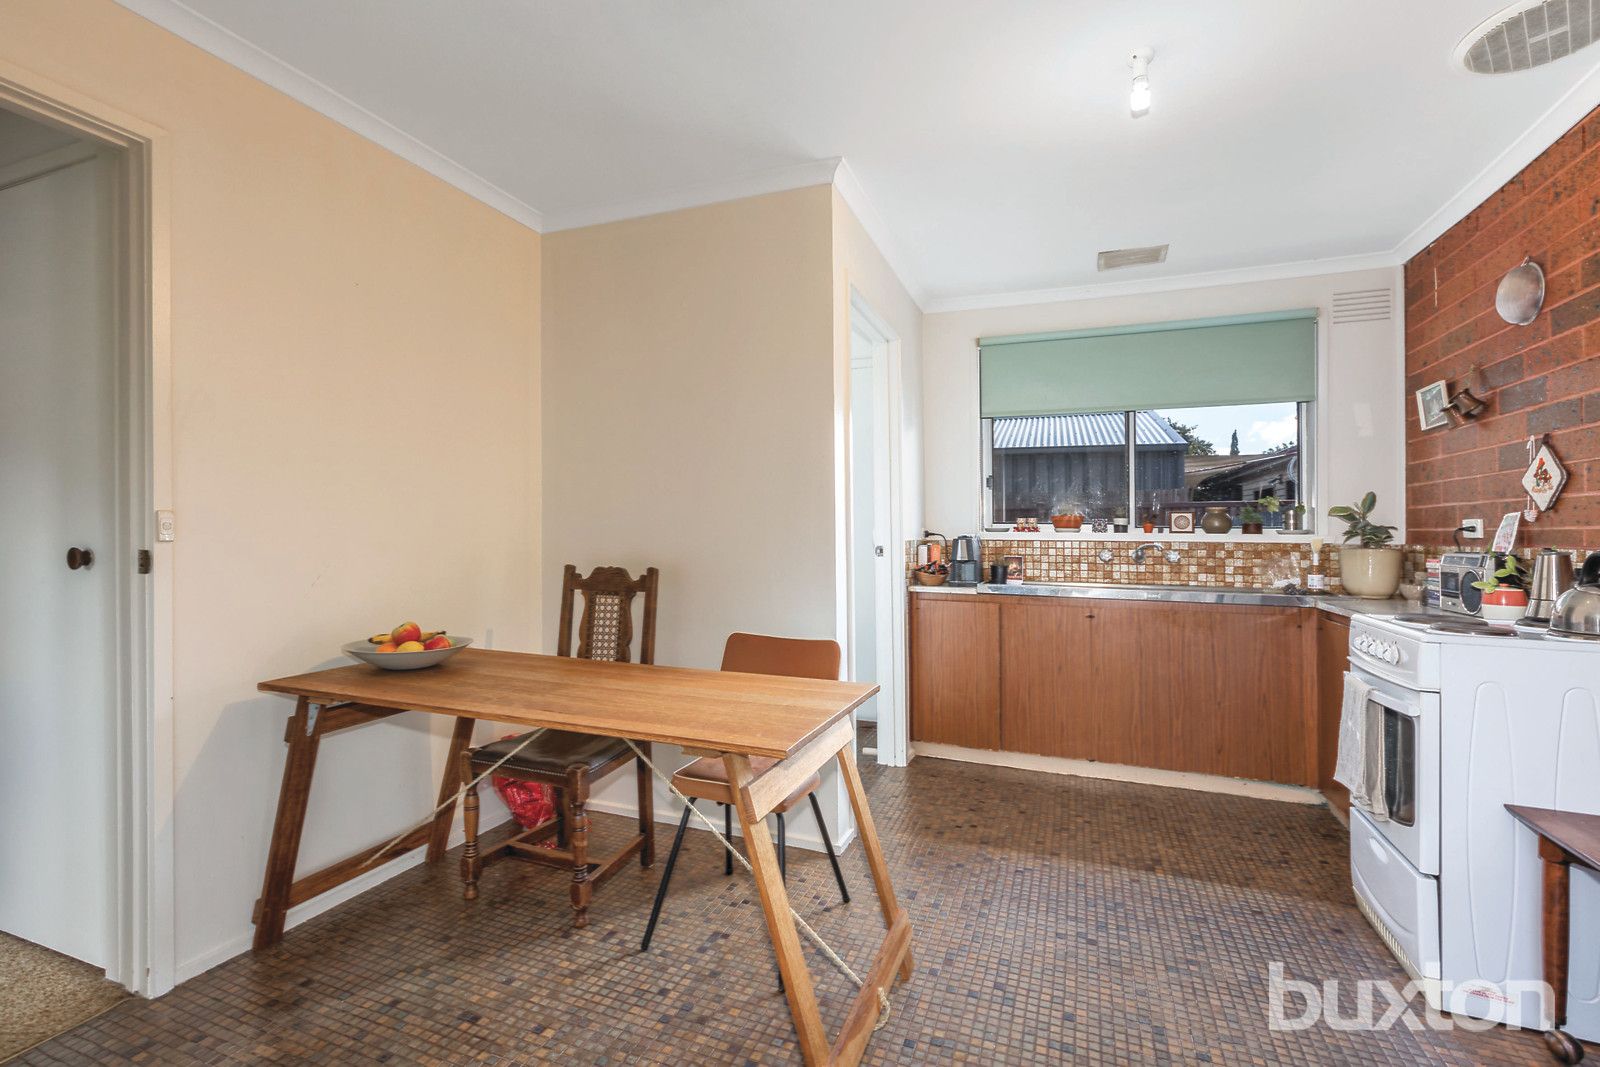 3/808 Humffray Street South, Mount Pleasant VIC 3350, Image 2